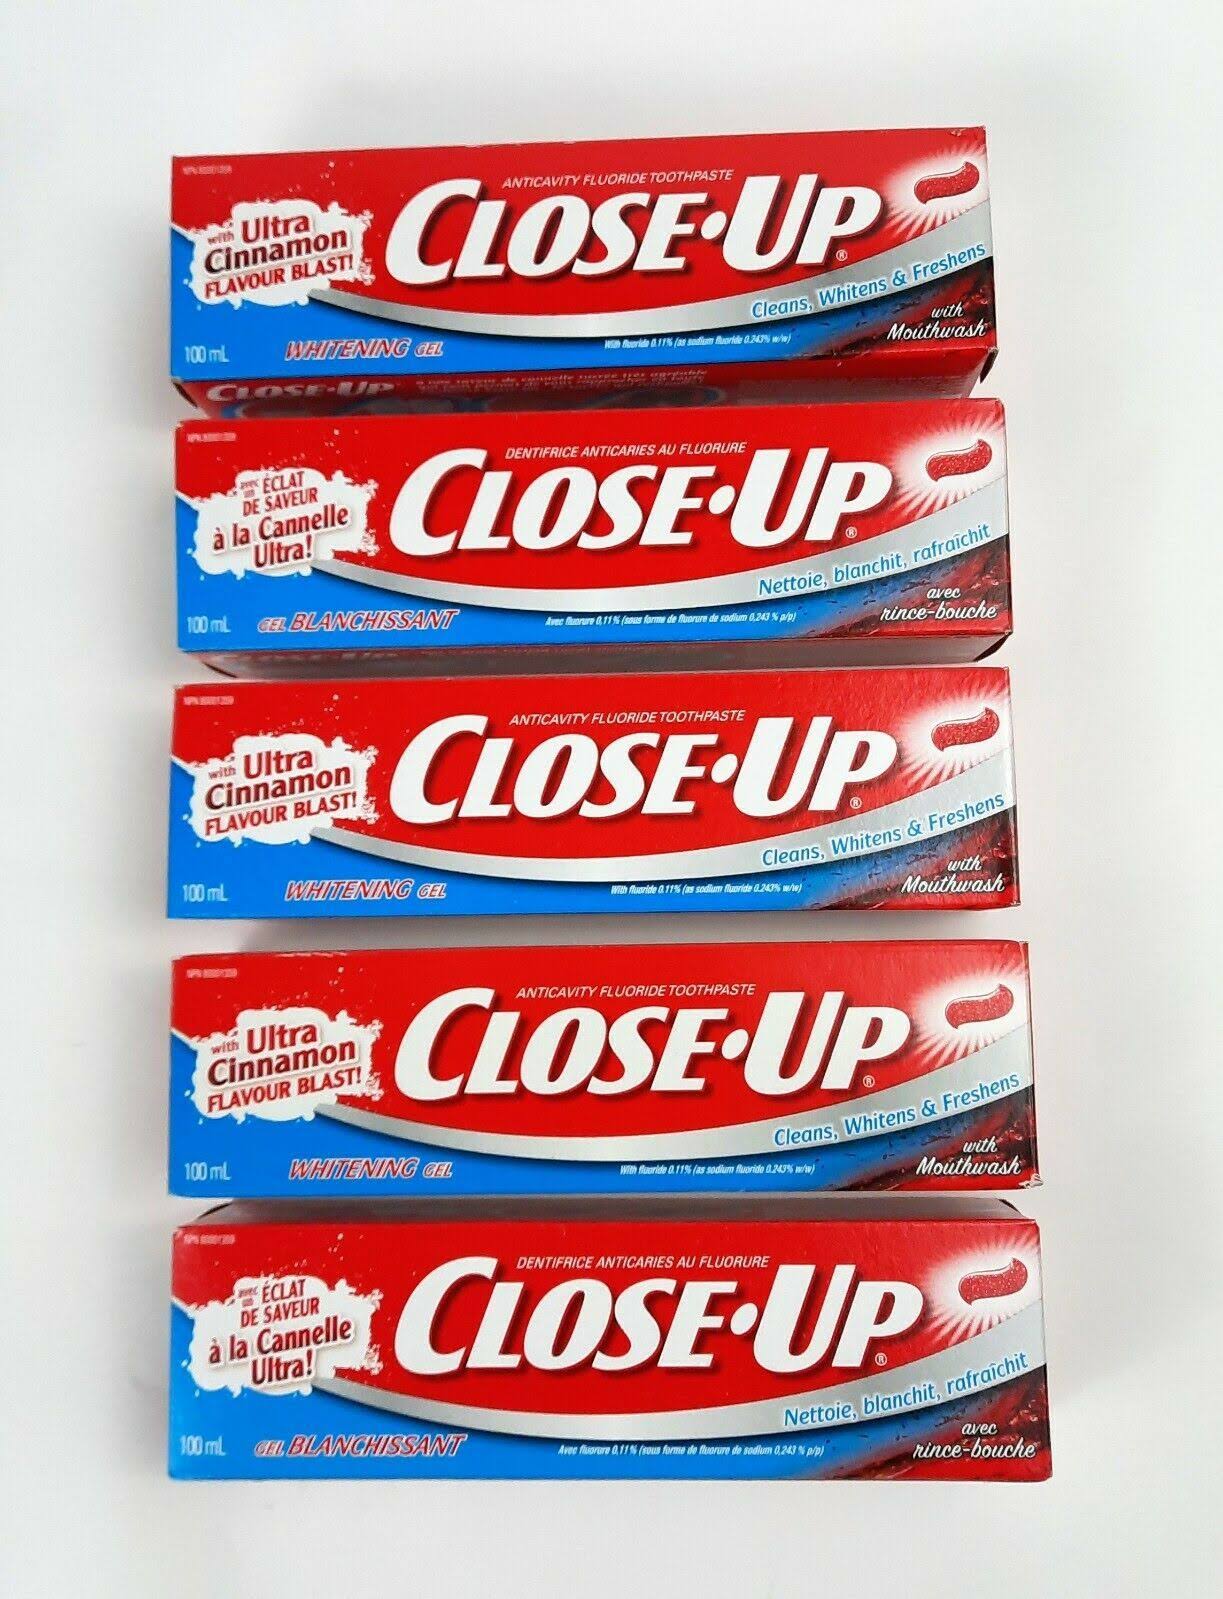 Close Up Toothpaste - 100ml